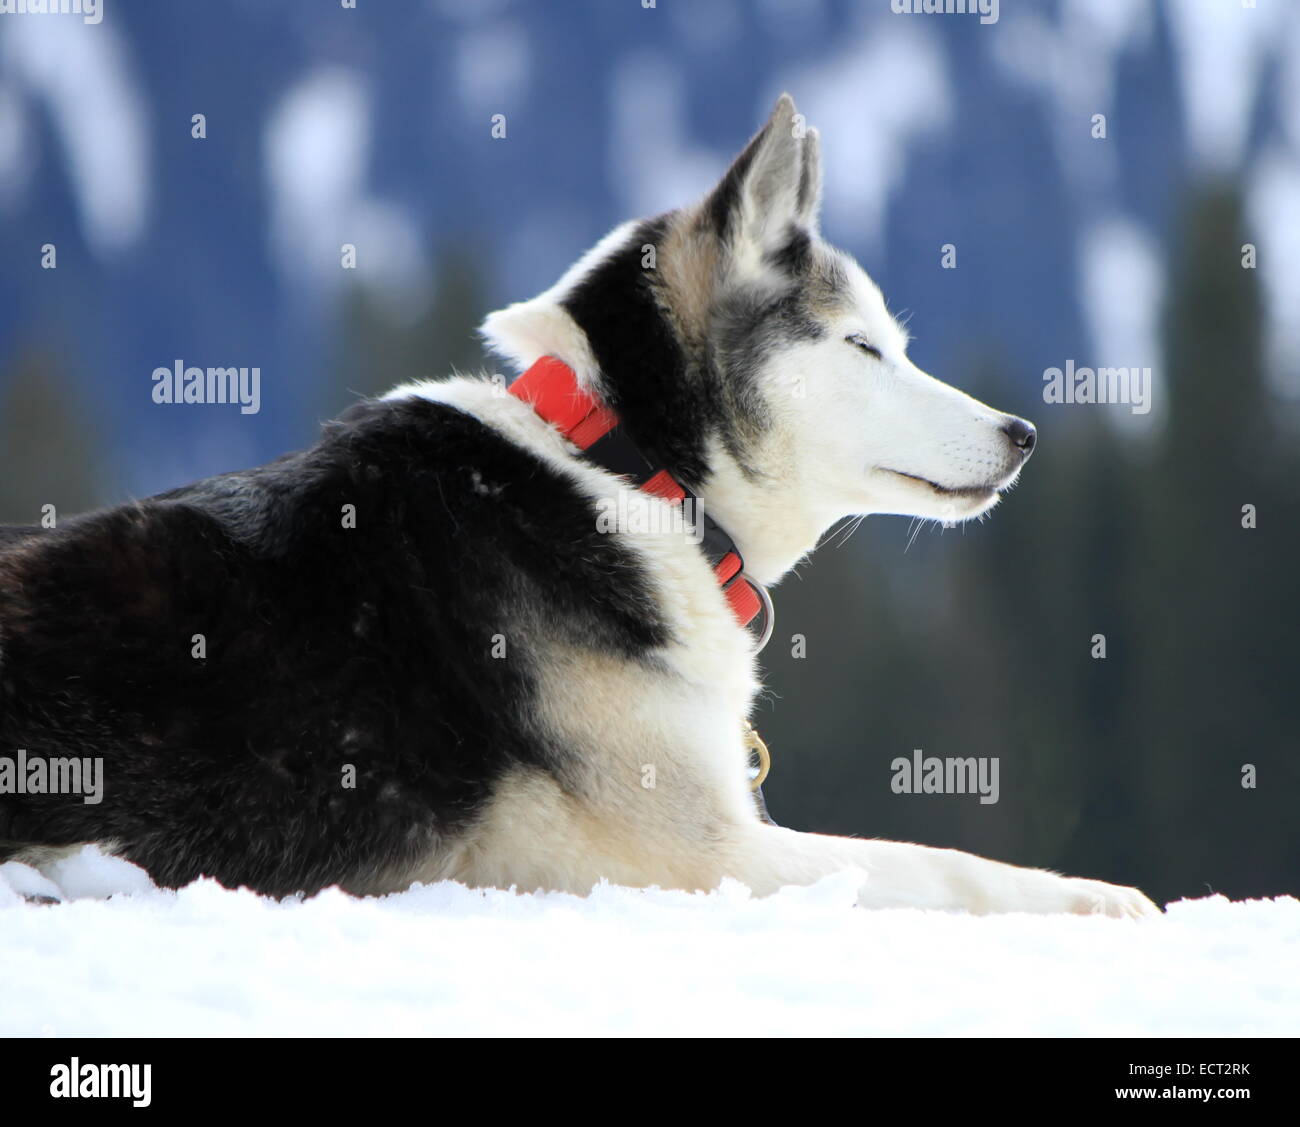 Siberian husky dog wearing red necklace sitting on snow having rest after the race Stock Photo